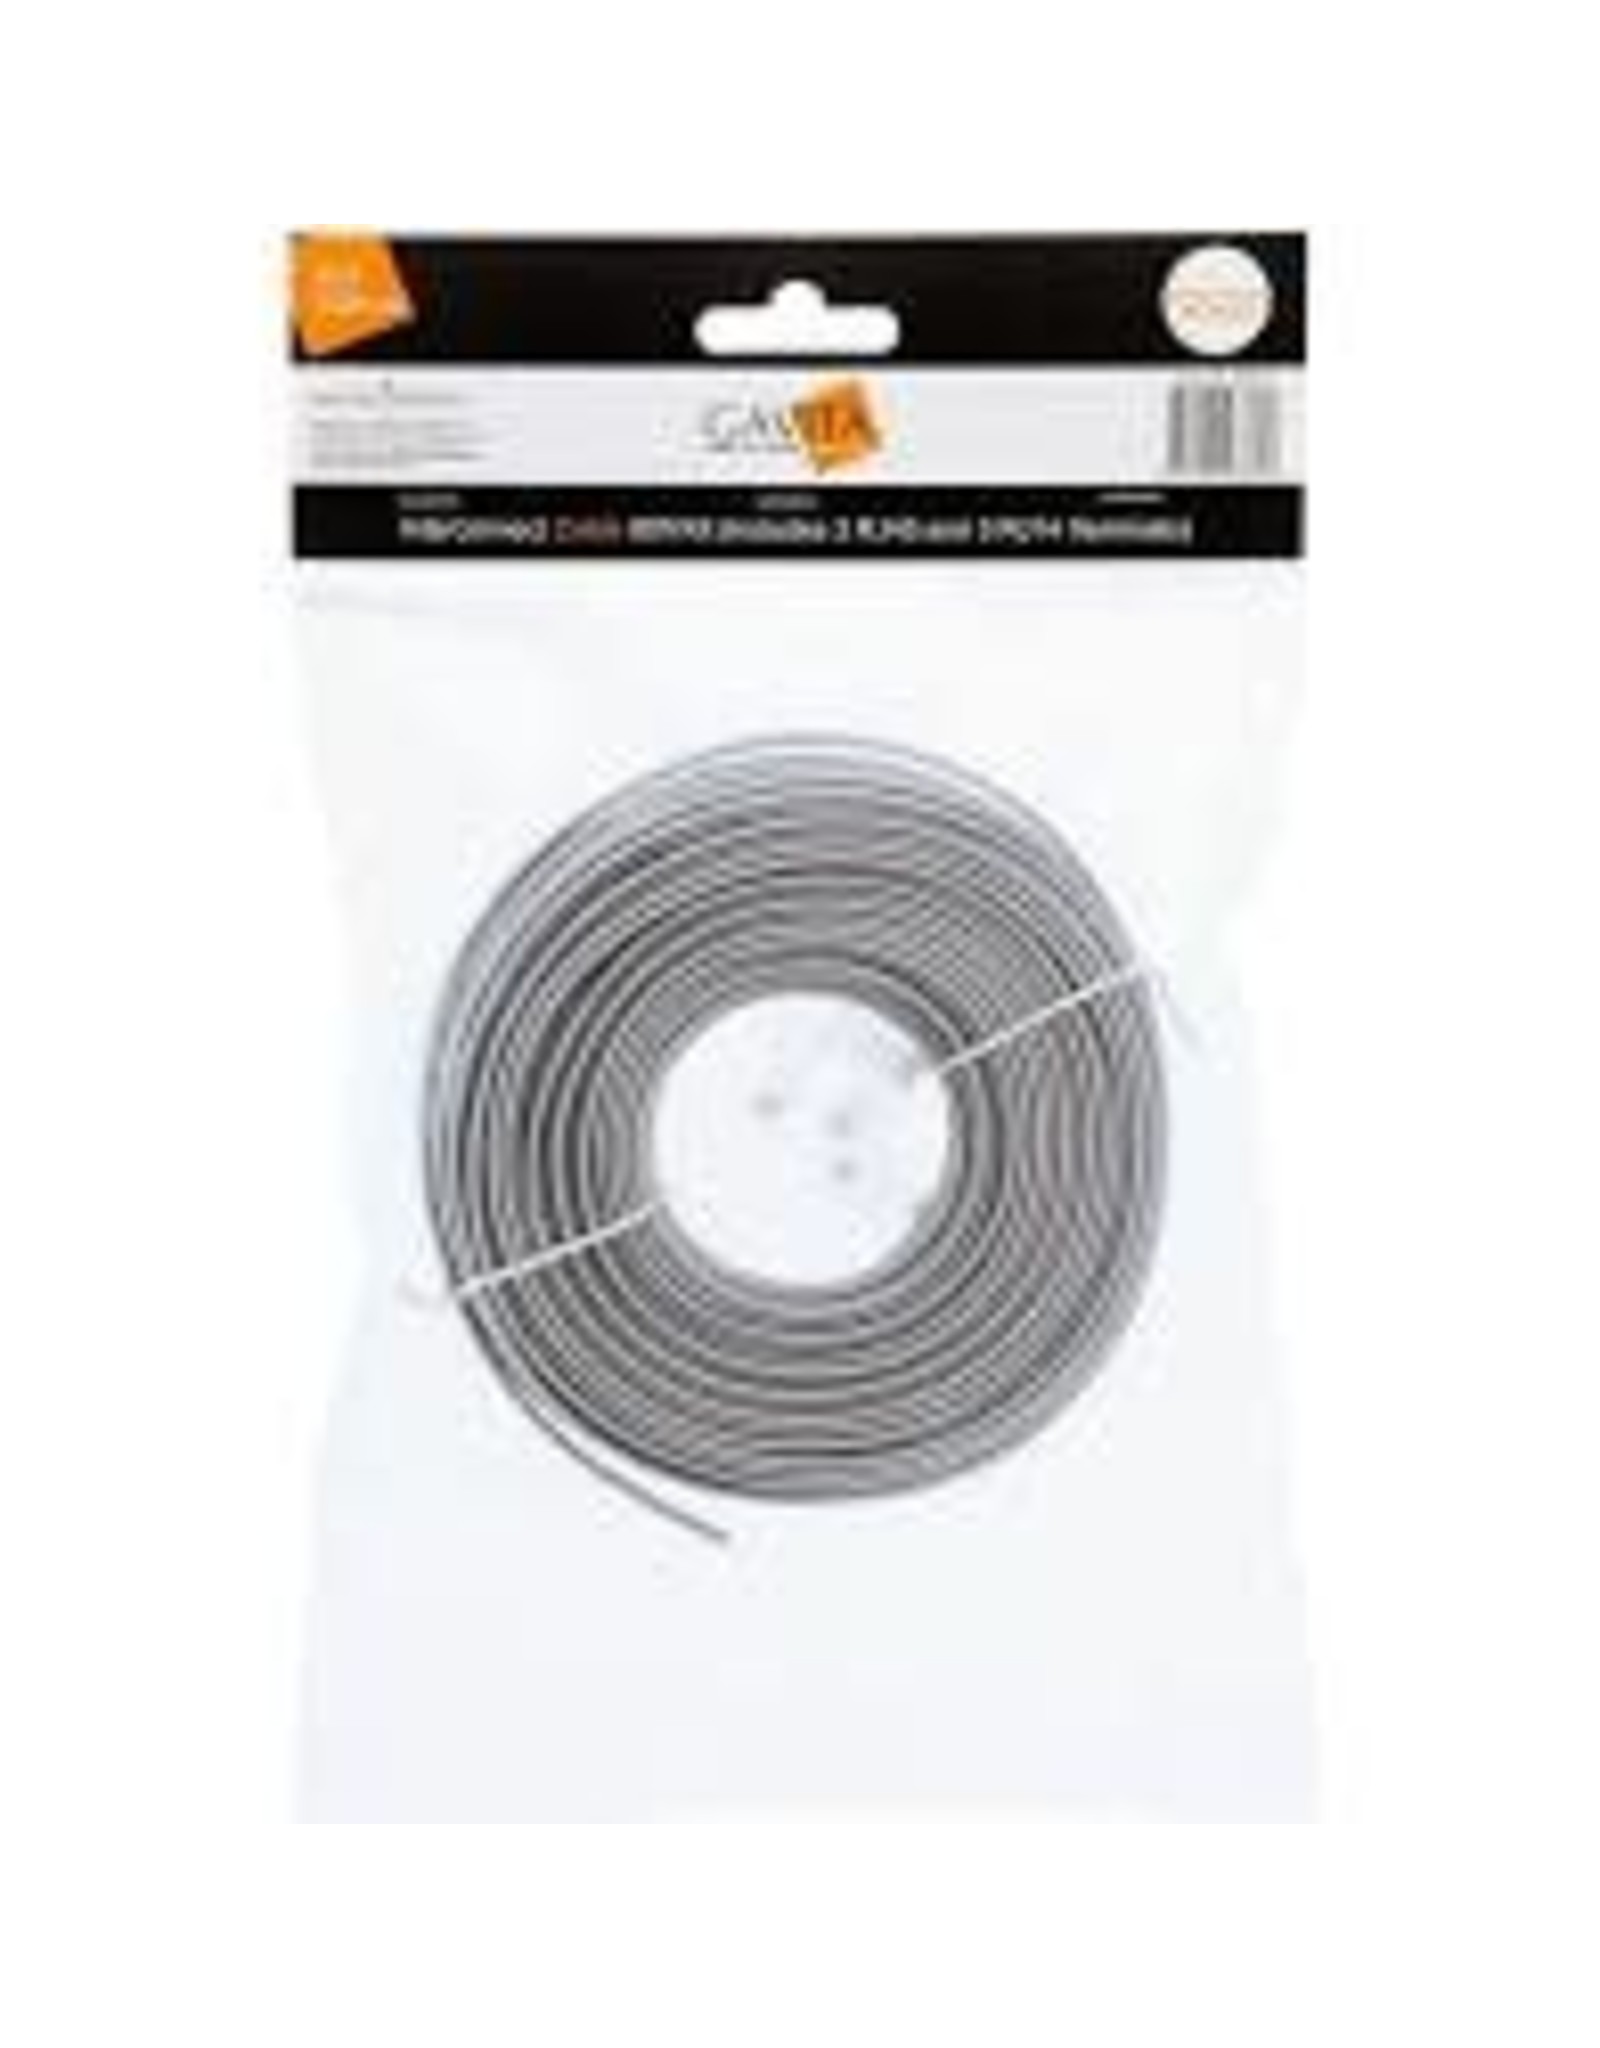 Gavita Gavita E-Series LED Adapter Interconnect Cable 80ft Kit (Includes 3 RJ45 and 3 RJ14 Terminals)